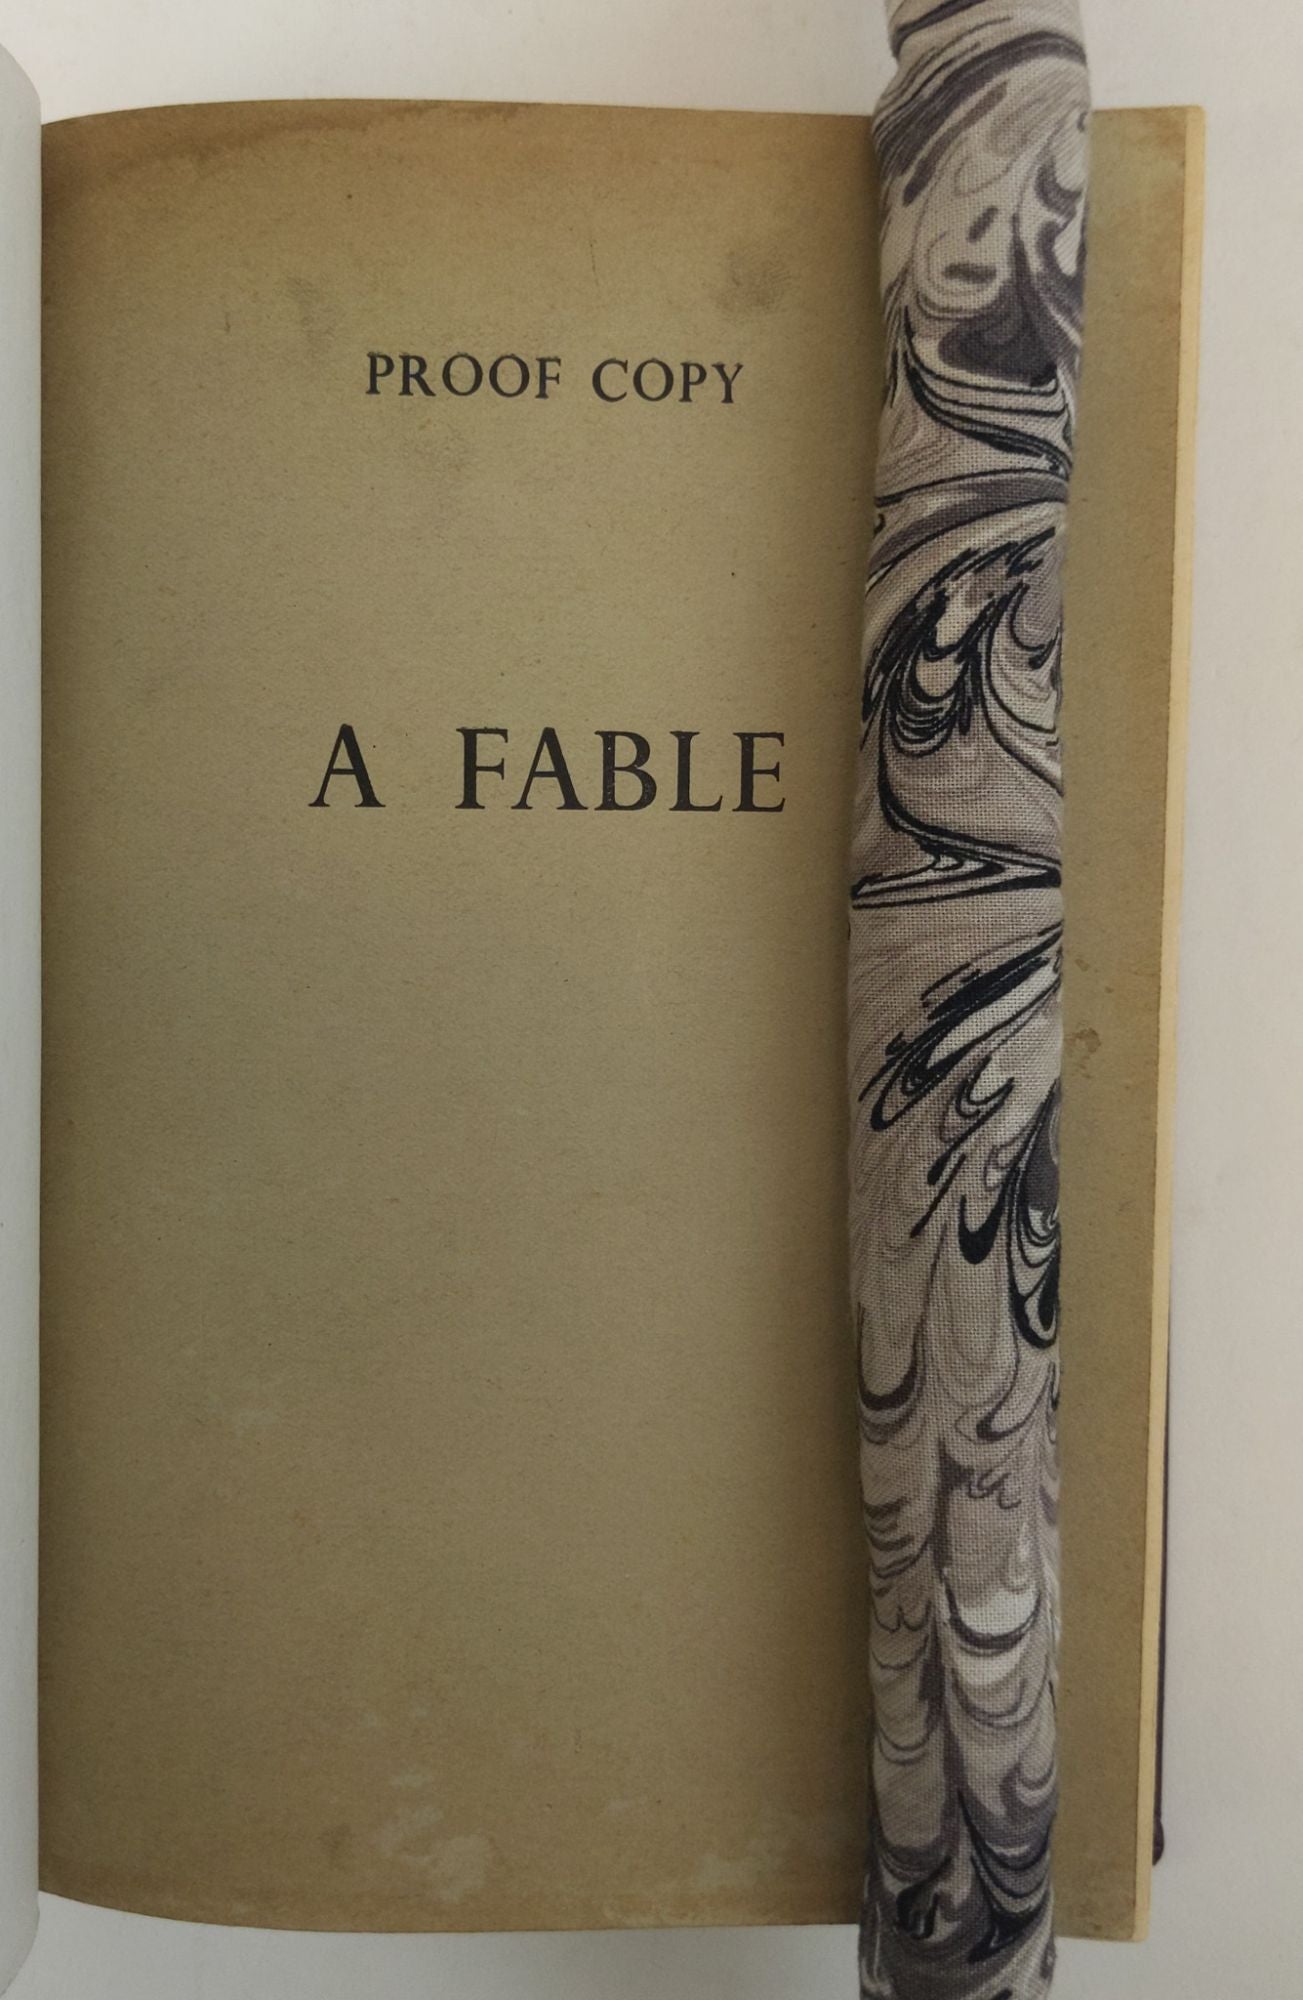 Product Image for A FABLE